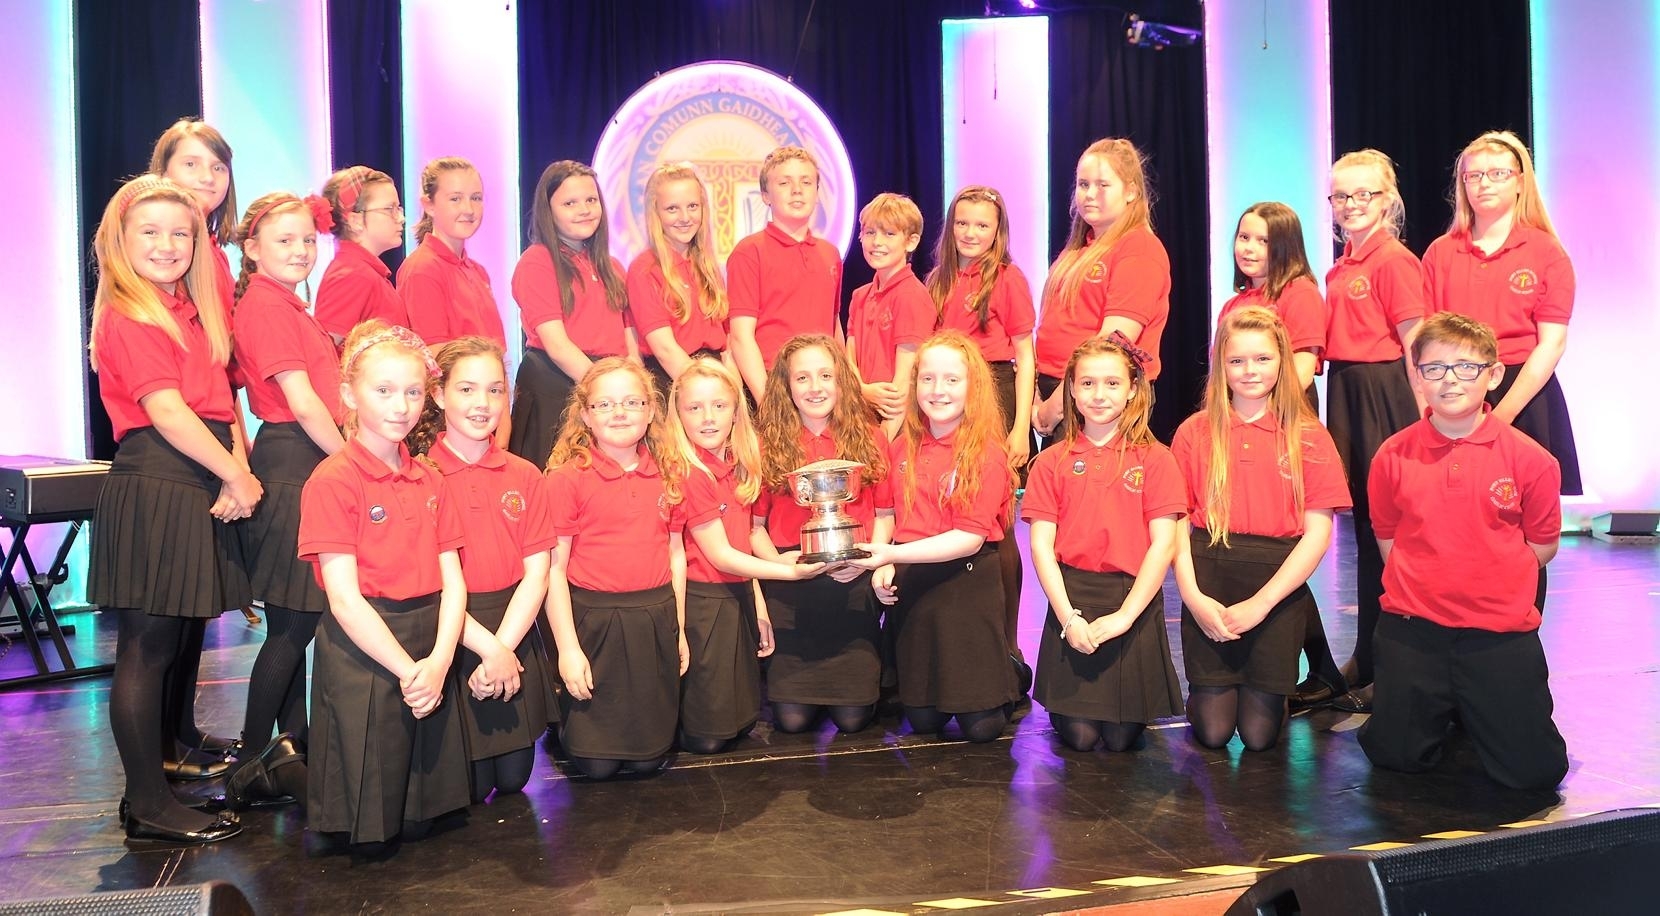 Picture by SANDY McCOOK   12th October '15 Royal National Mod, Oban 2015  The Port Ellen Primary School Choir with the Susan Paterson Caledonian MacBrayne Trophy. One the left is David Cannon of Caledonian MacBrayne and on the right Maureen Macdonald, conductor.